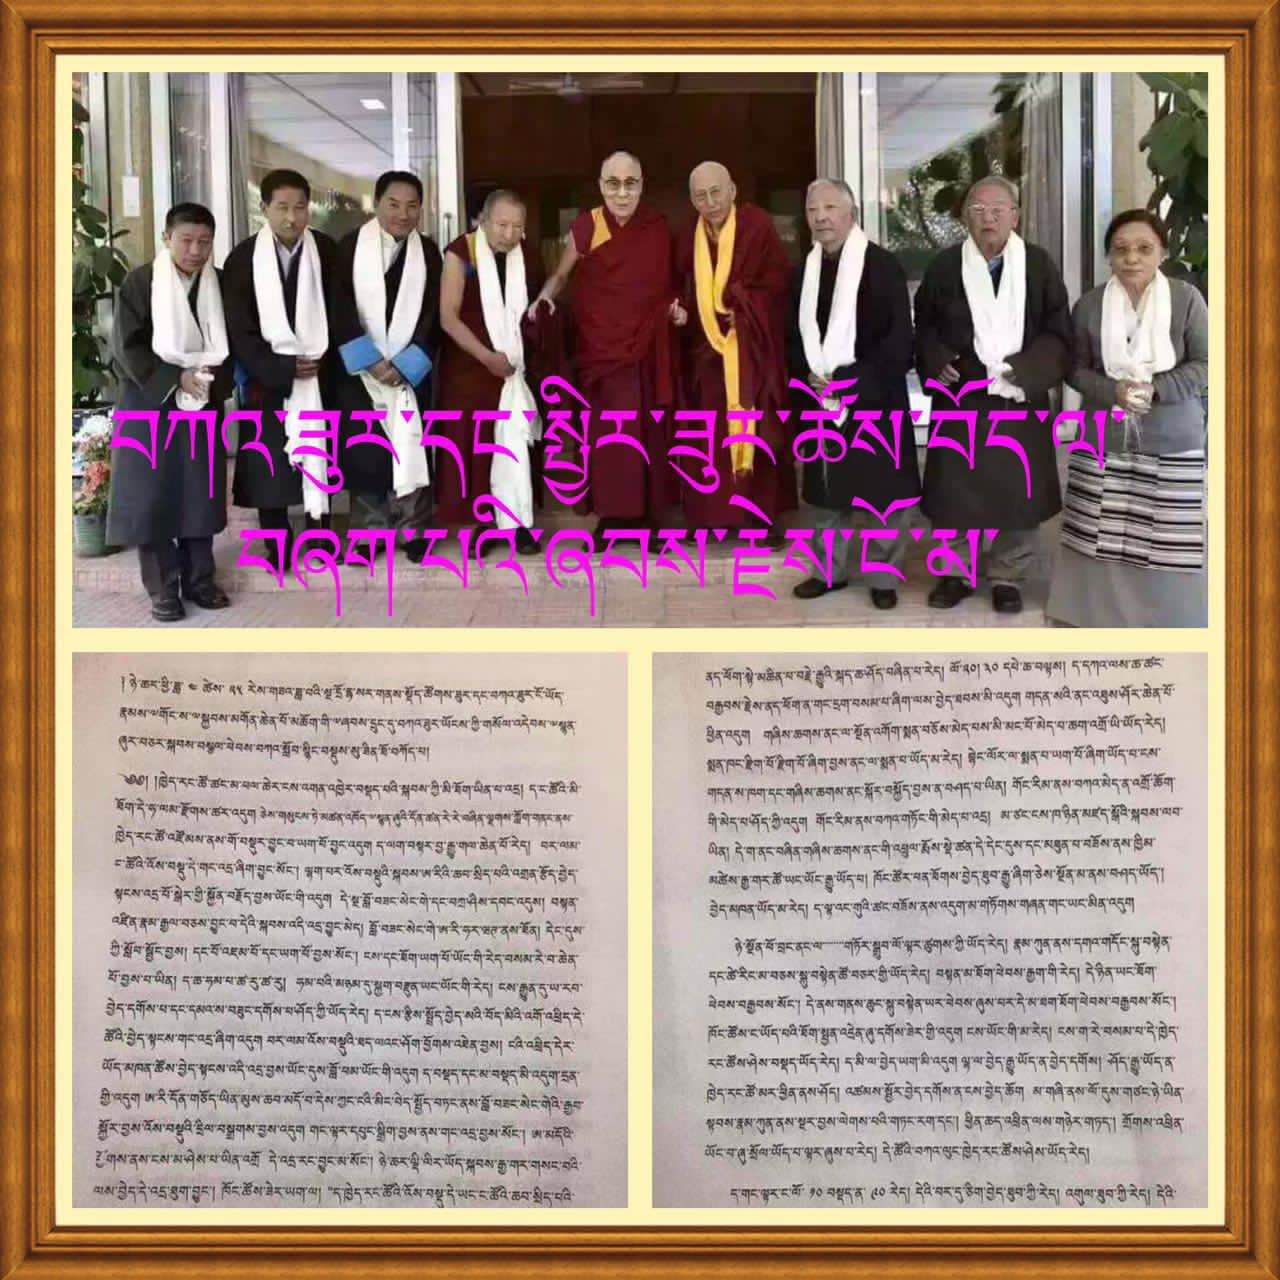 The transcript has been in circulation in conjunction with this image, purporting to show the people who had an audience with His Holiness the Dalai Lama